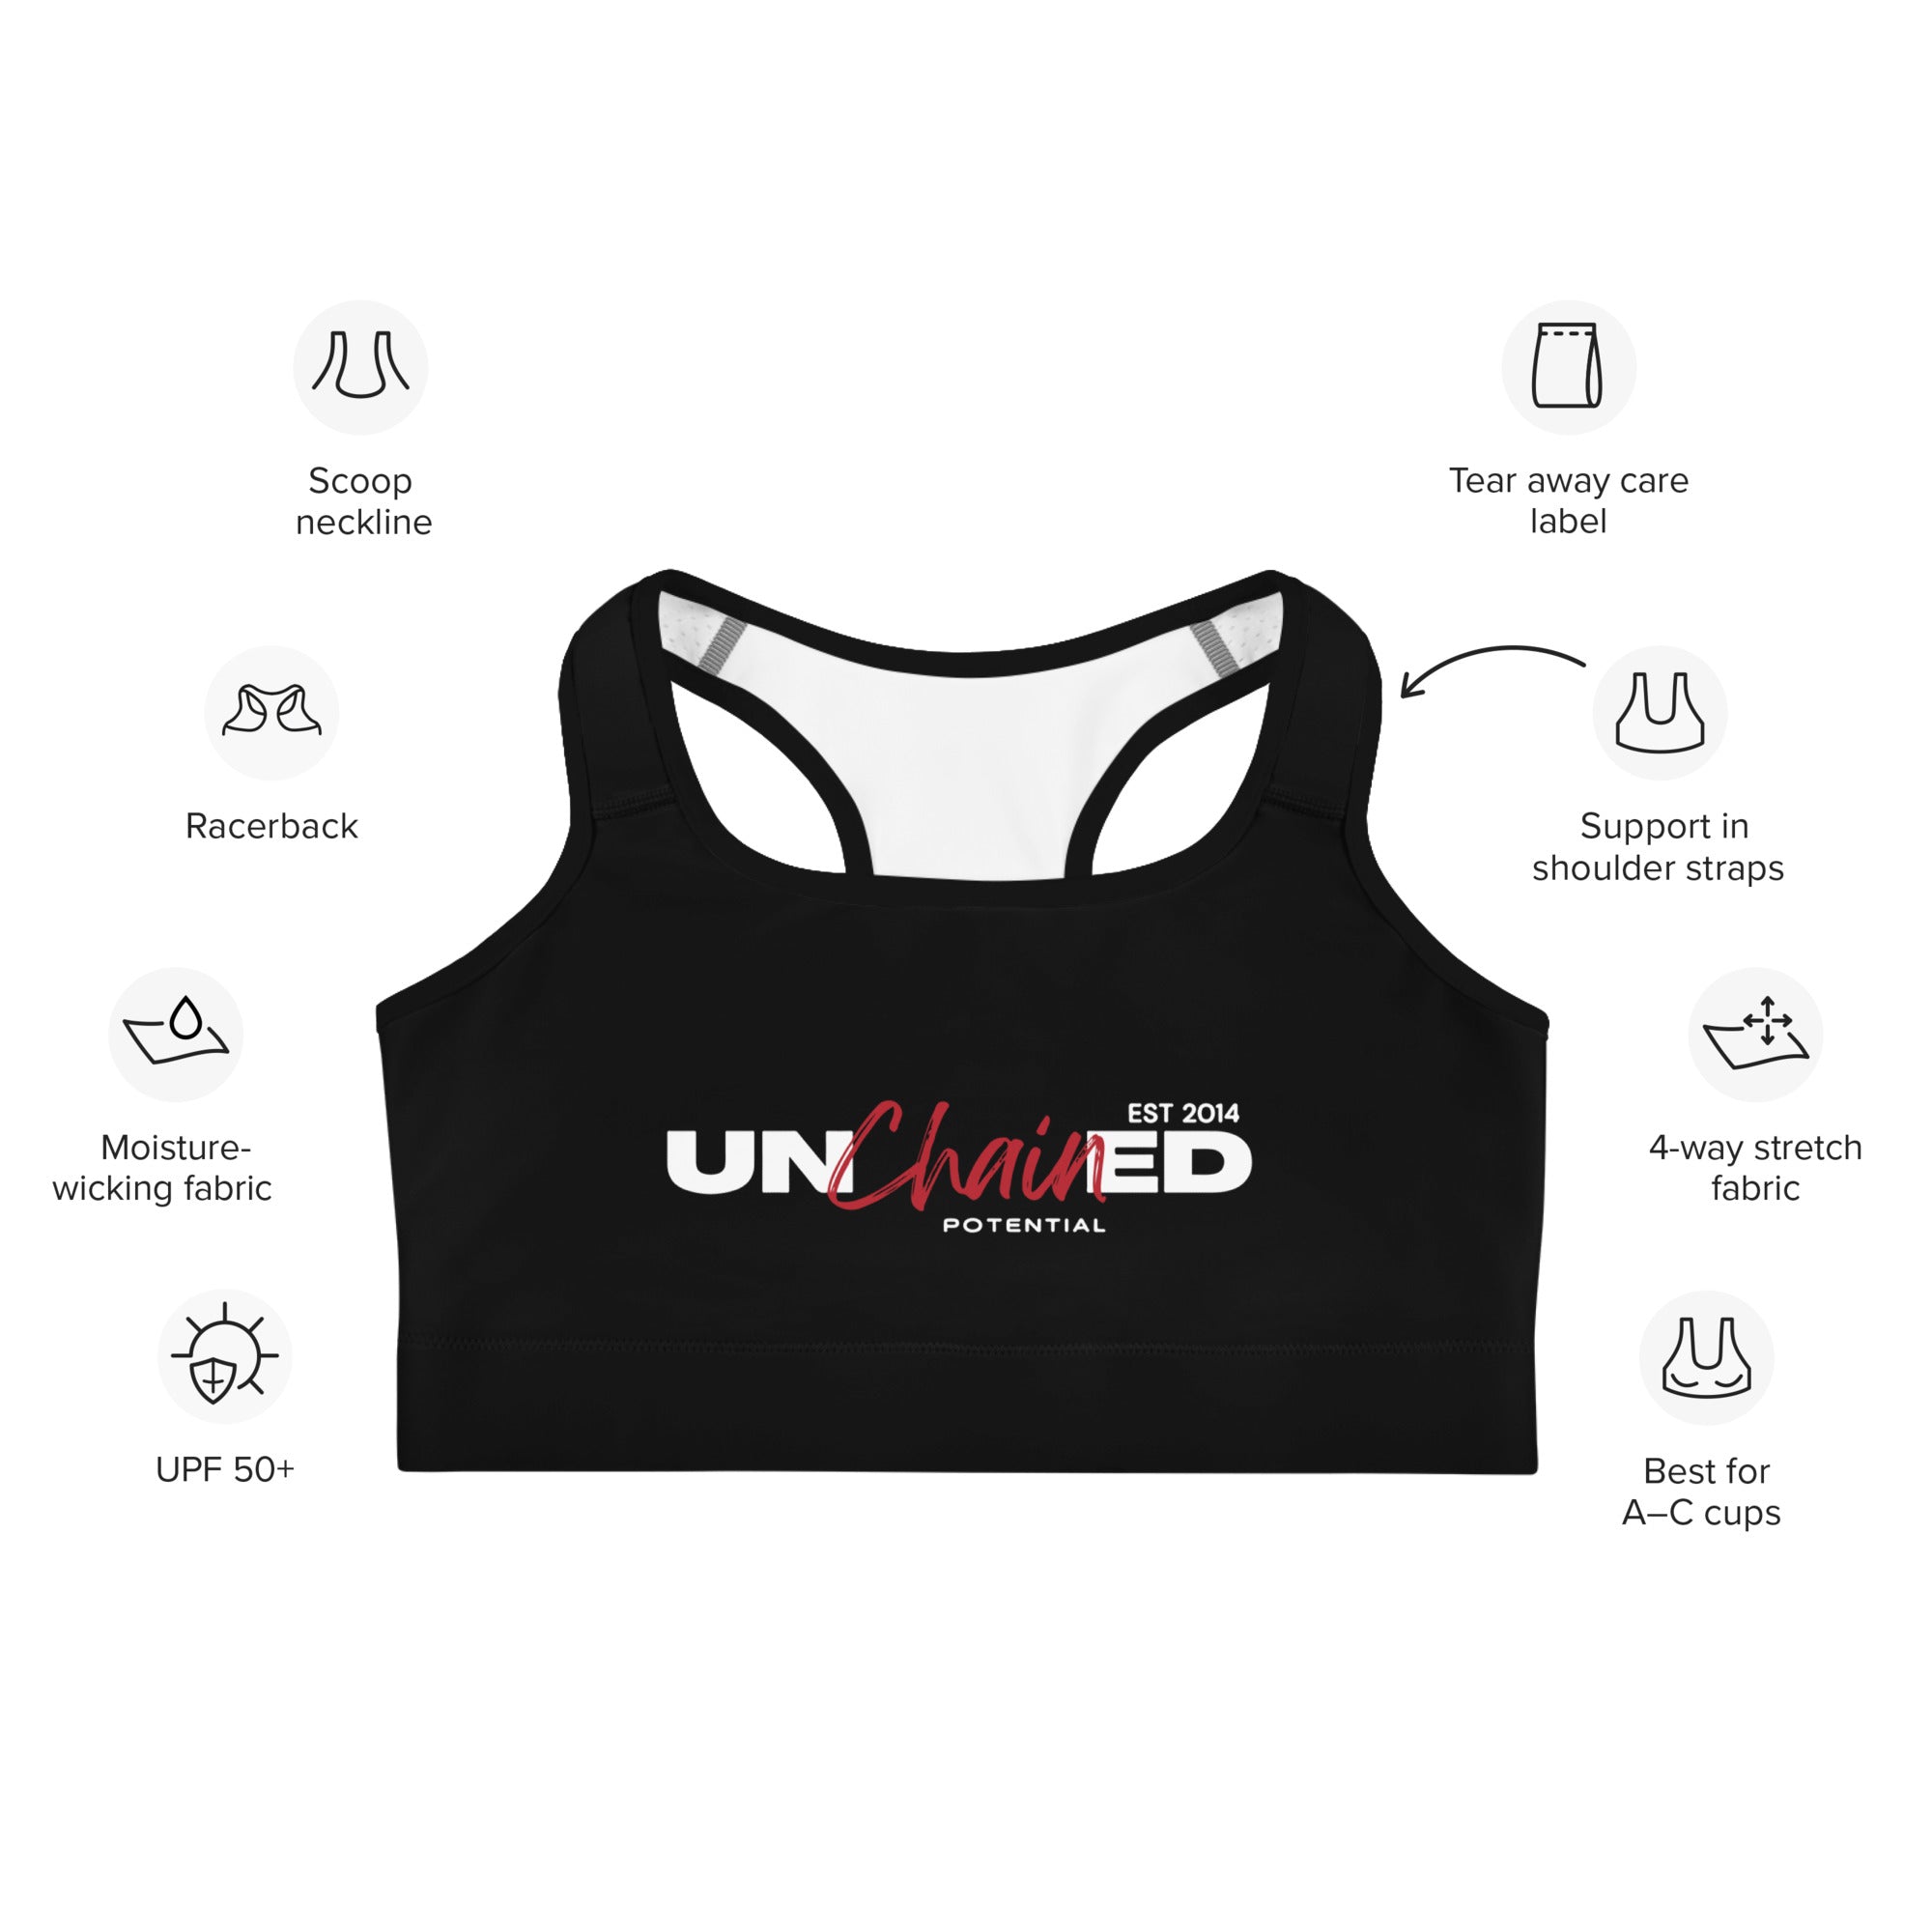 Unchained Potential Sports bra